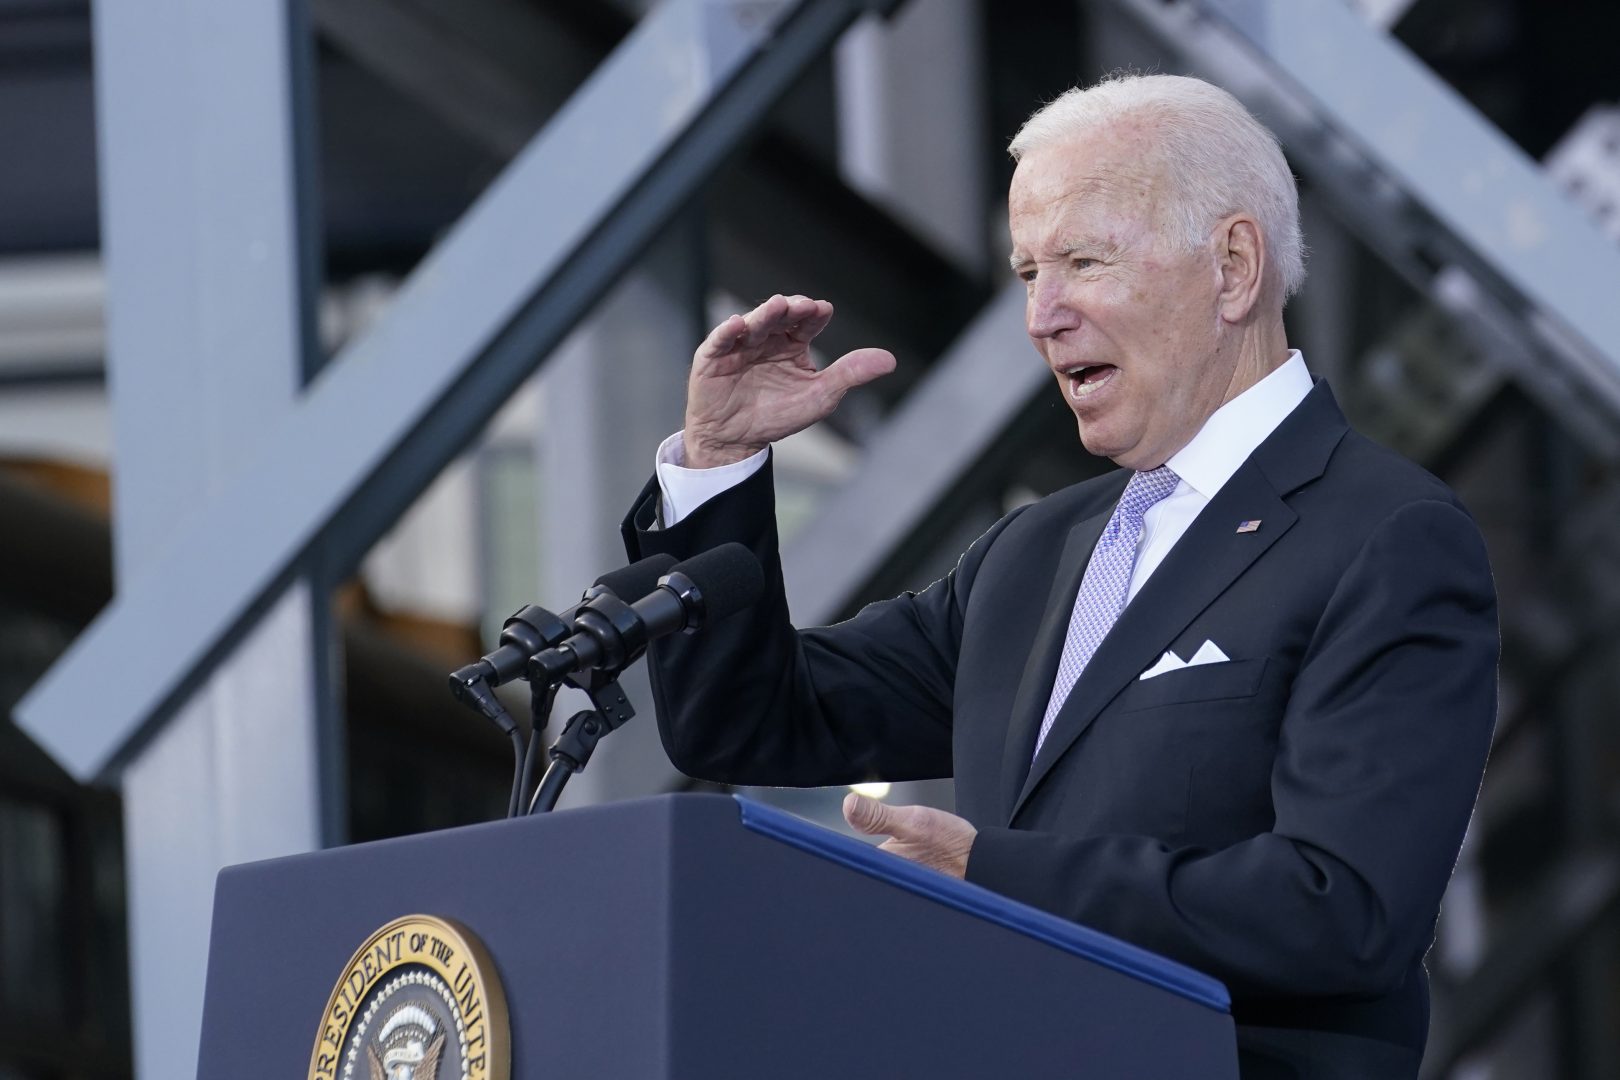 President Joe Biden speaks about his infrastructure plan and his domestic agenda during a visit to the Electric City Trolley Museum in Scranton, Pa., Wednesday, Oct. 20, 2021. (AP Photo/Susan Walsh)